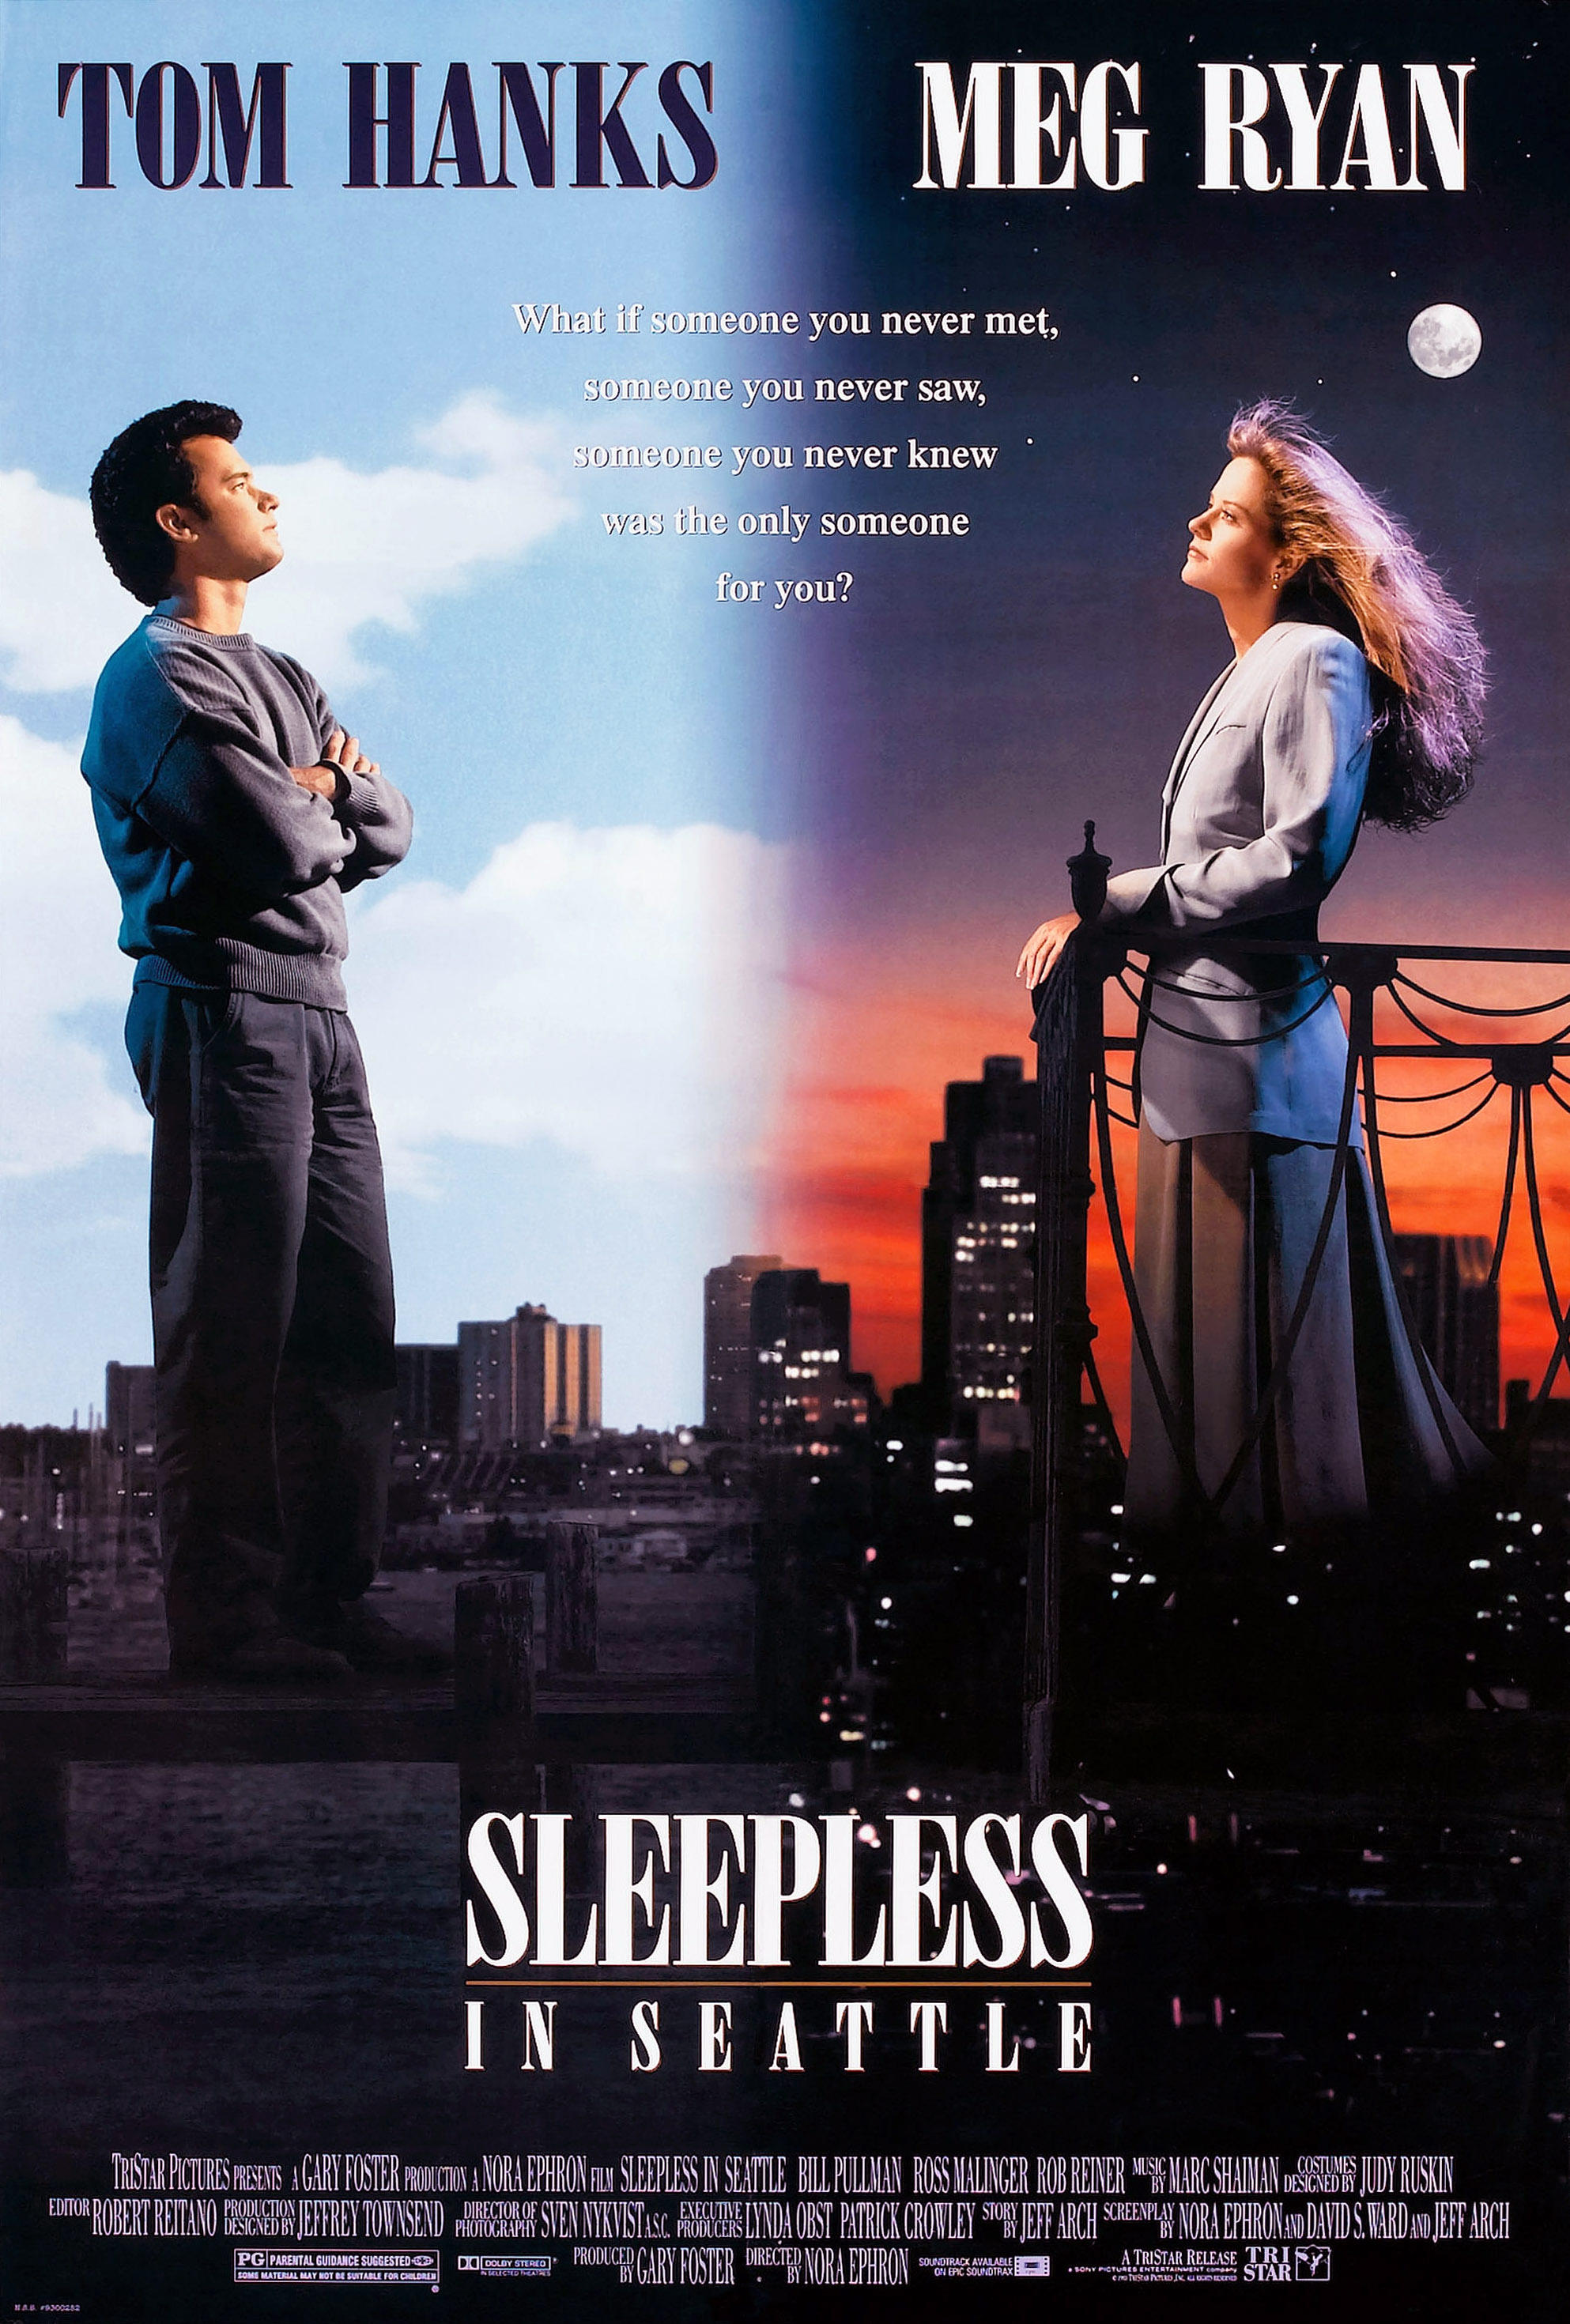 Her show was part of the basis for the movie Sleepless in Seattle